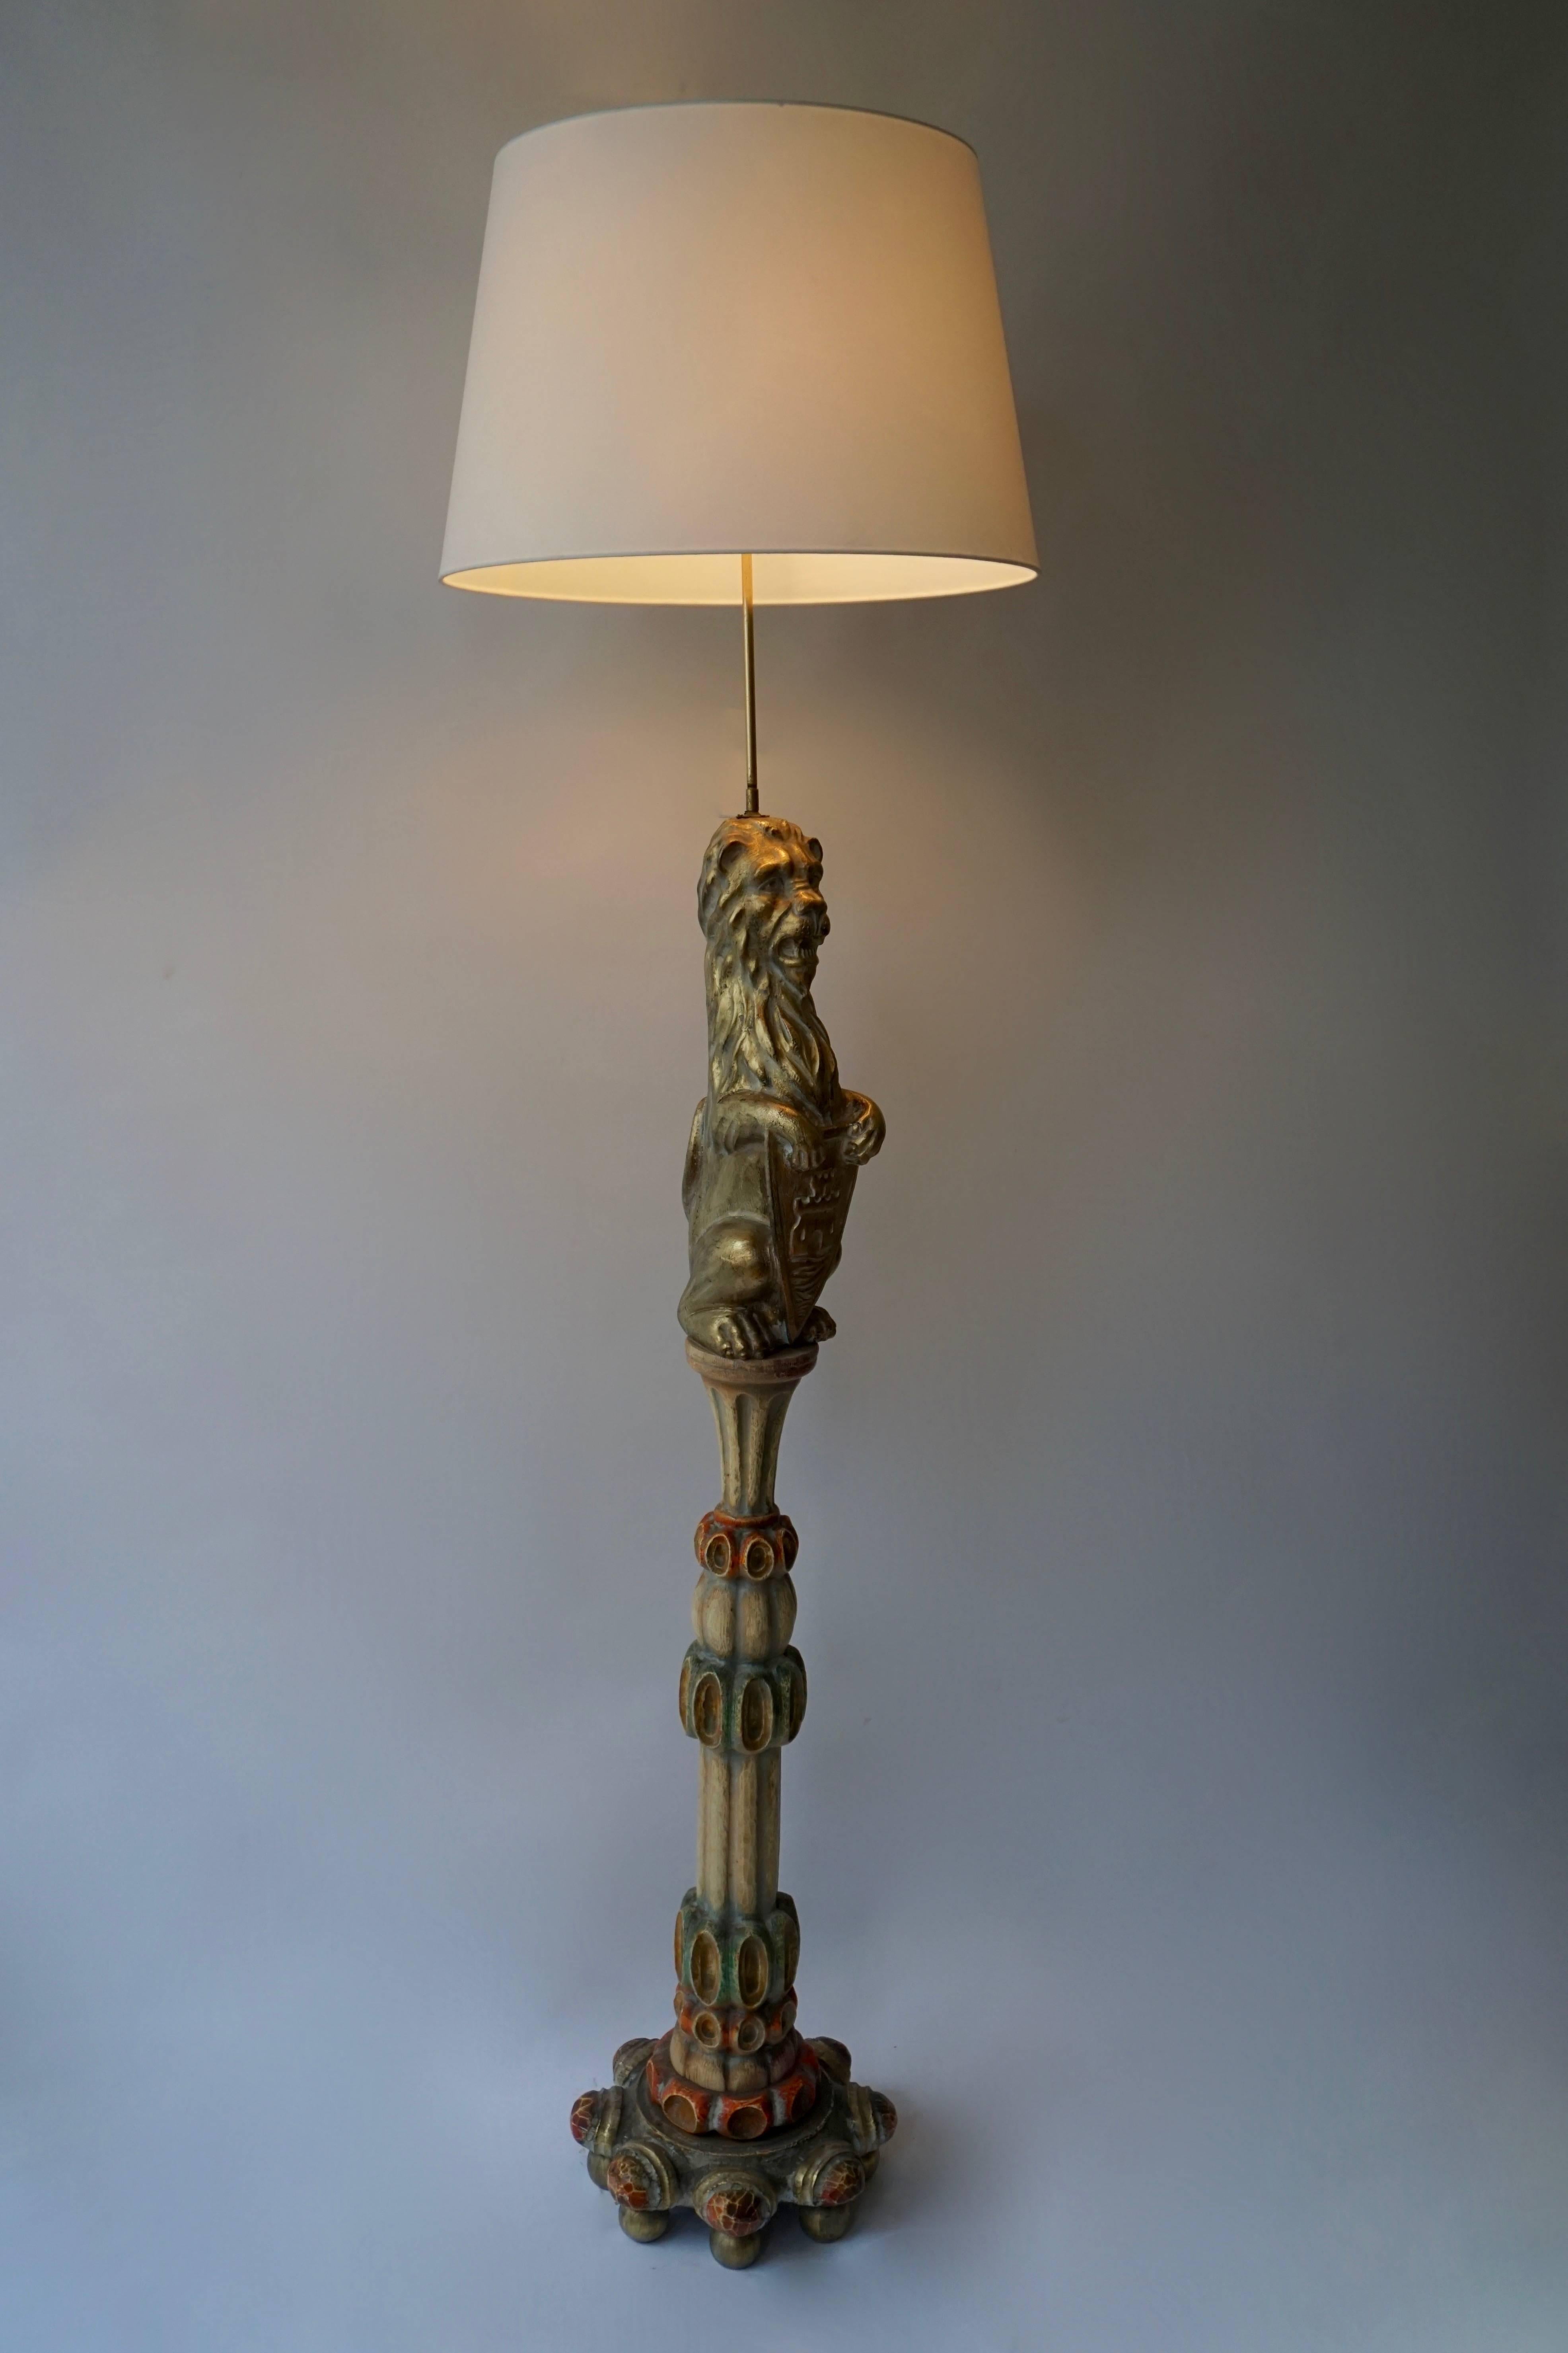 
A magnificent handcrafted Venetian Rococo figural floor lamp, made by highly skilled artisans in the Veneto region of northeastern Italy in the mid of the 20th century.Exquisitely decorated, sculpted from solid wood to depict a lion standing on a